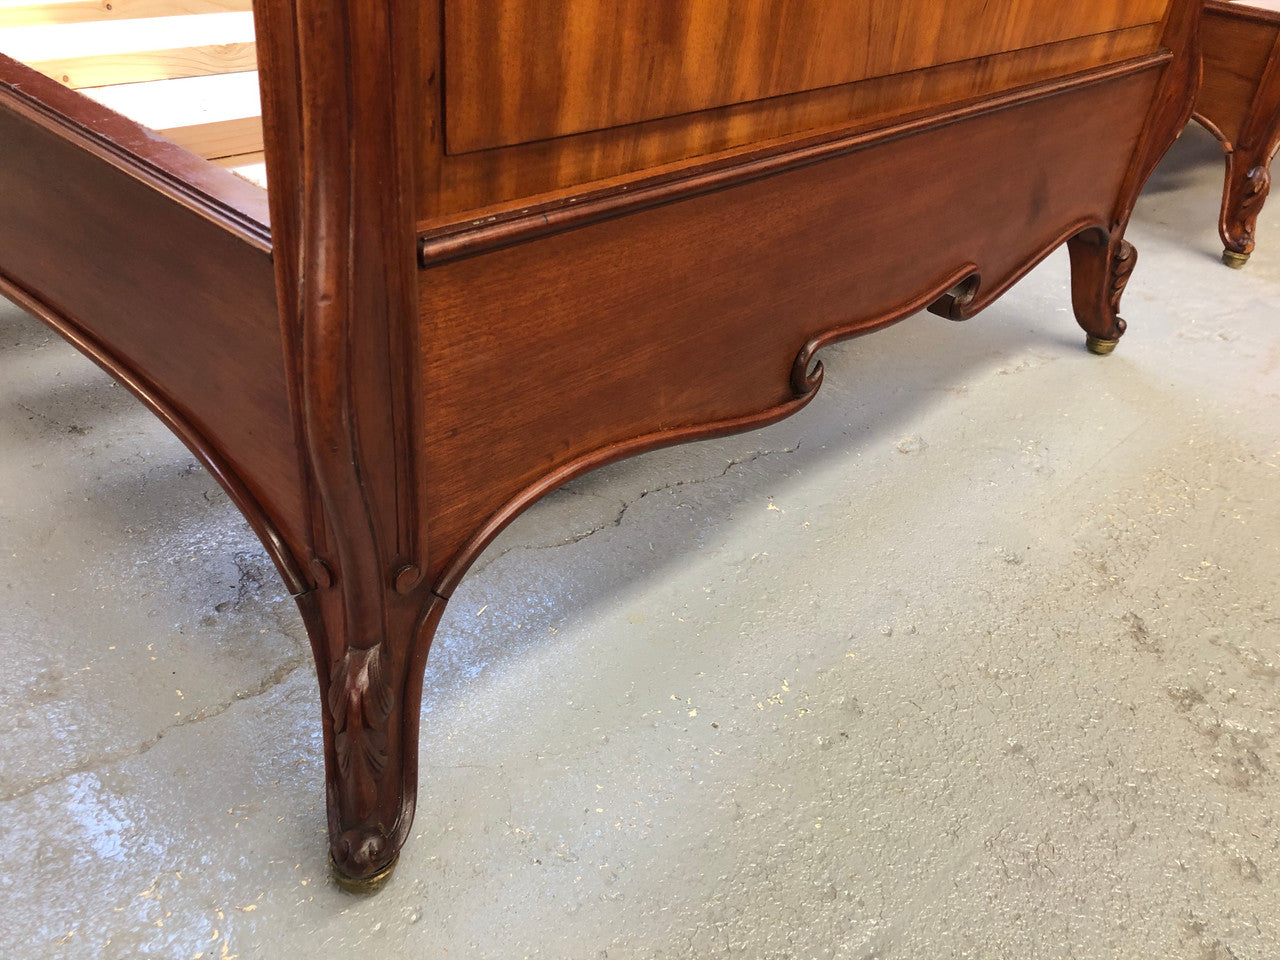 Rare French king single walnut bed, circa 1900. In good original condition. We currently have two matching kind single beds but they are being sold separately.